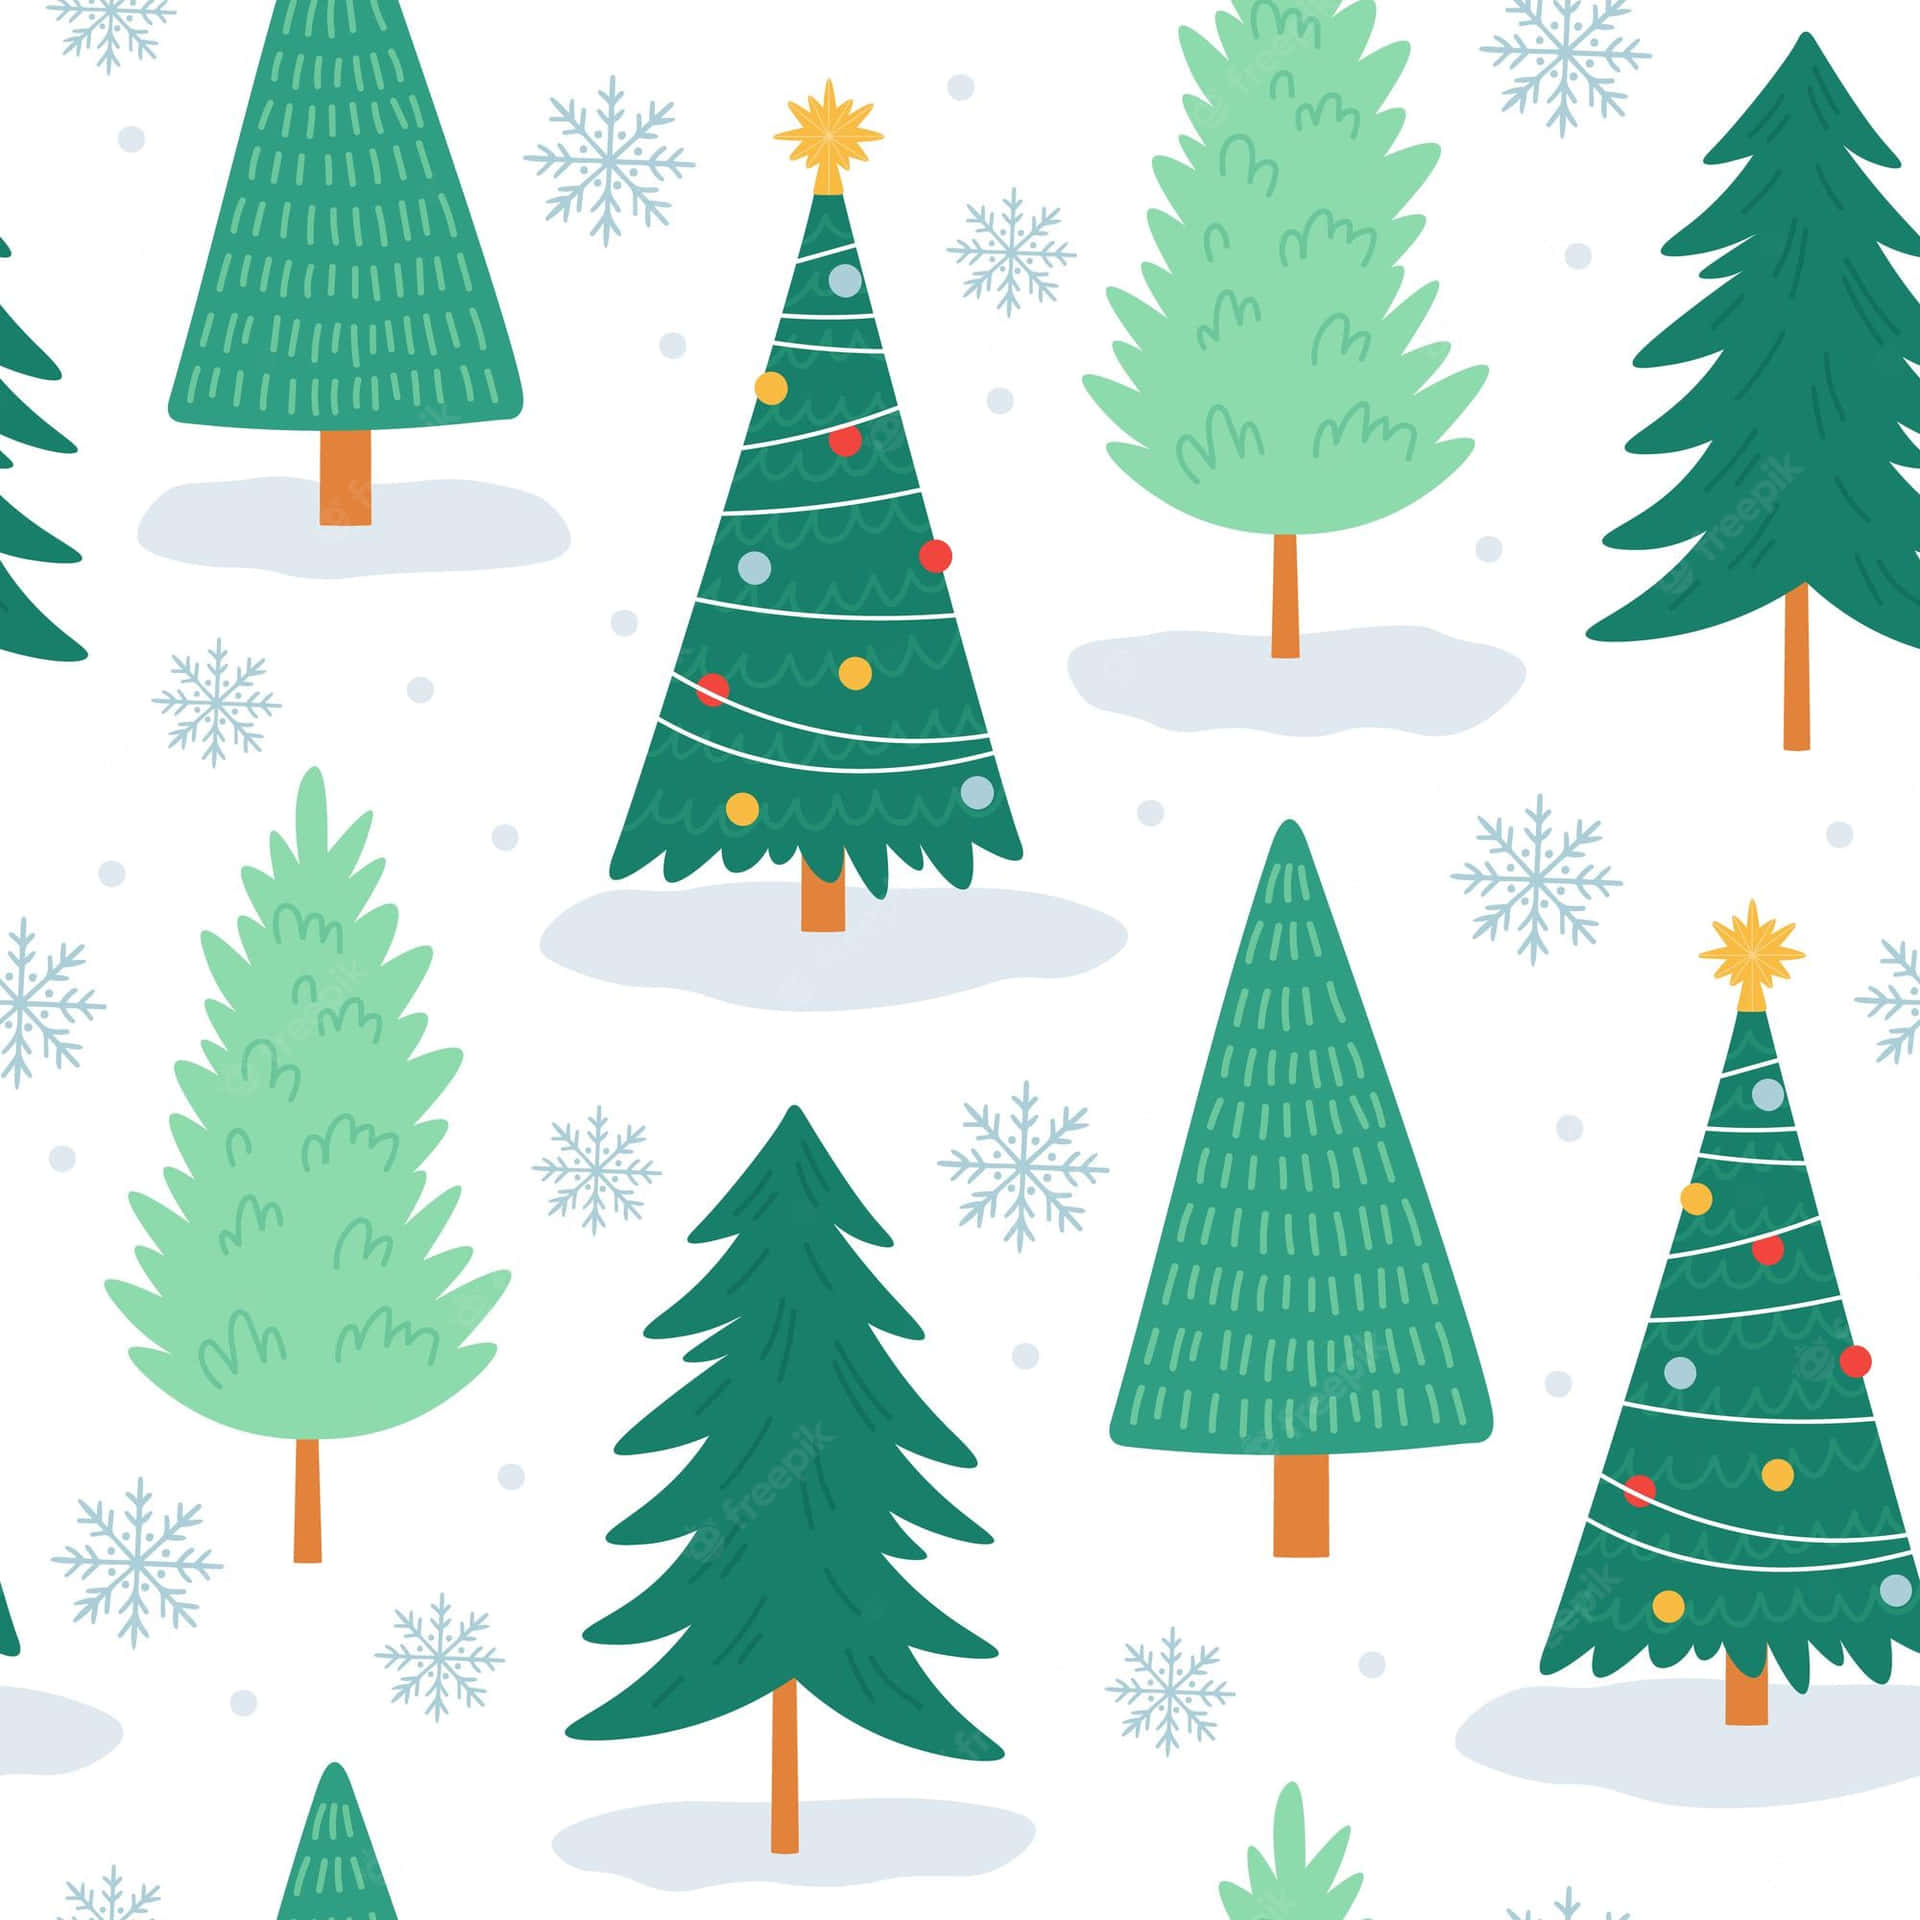 Celebrate this Christmas with a cute festive tree. Wallpaper